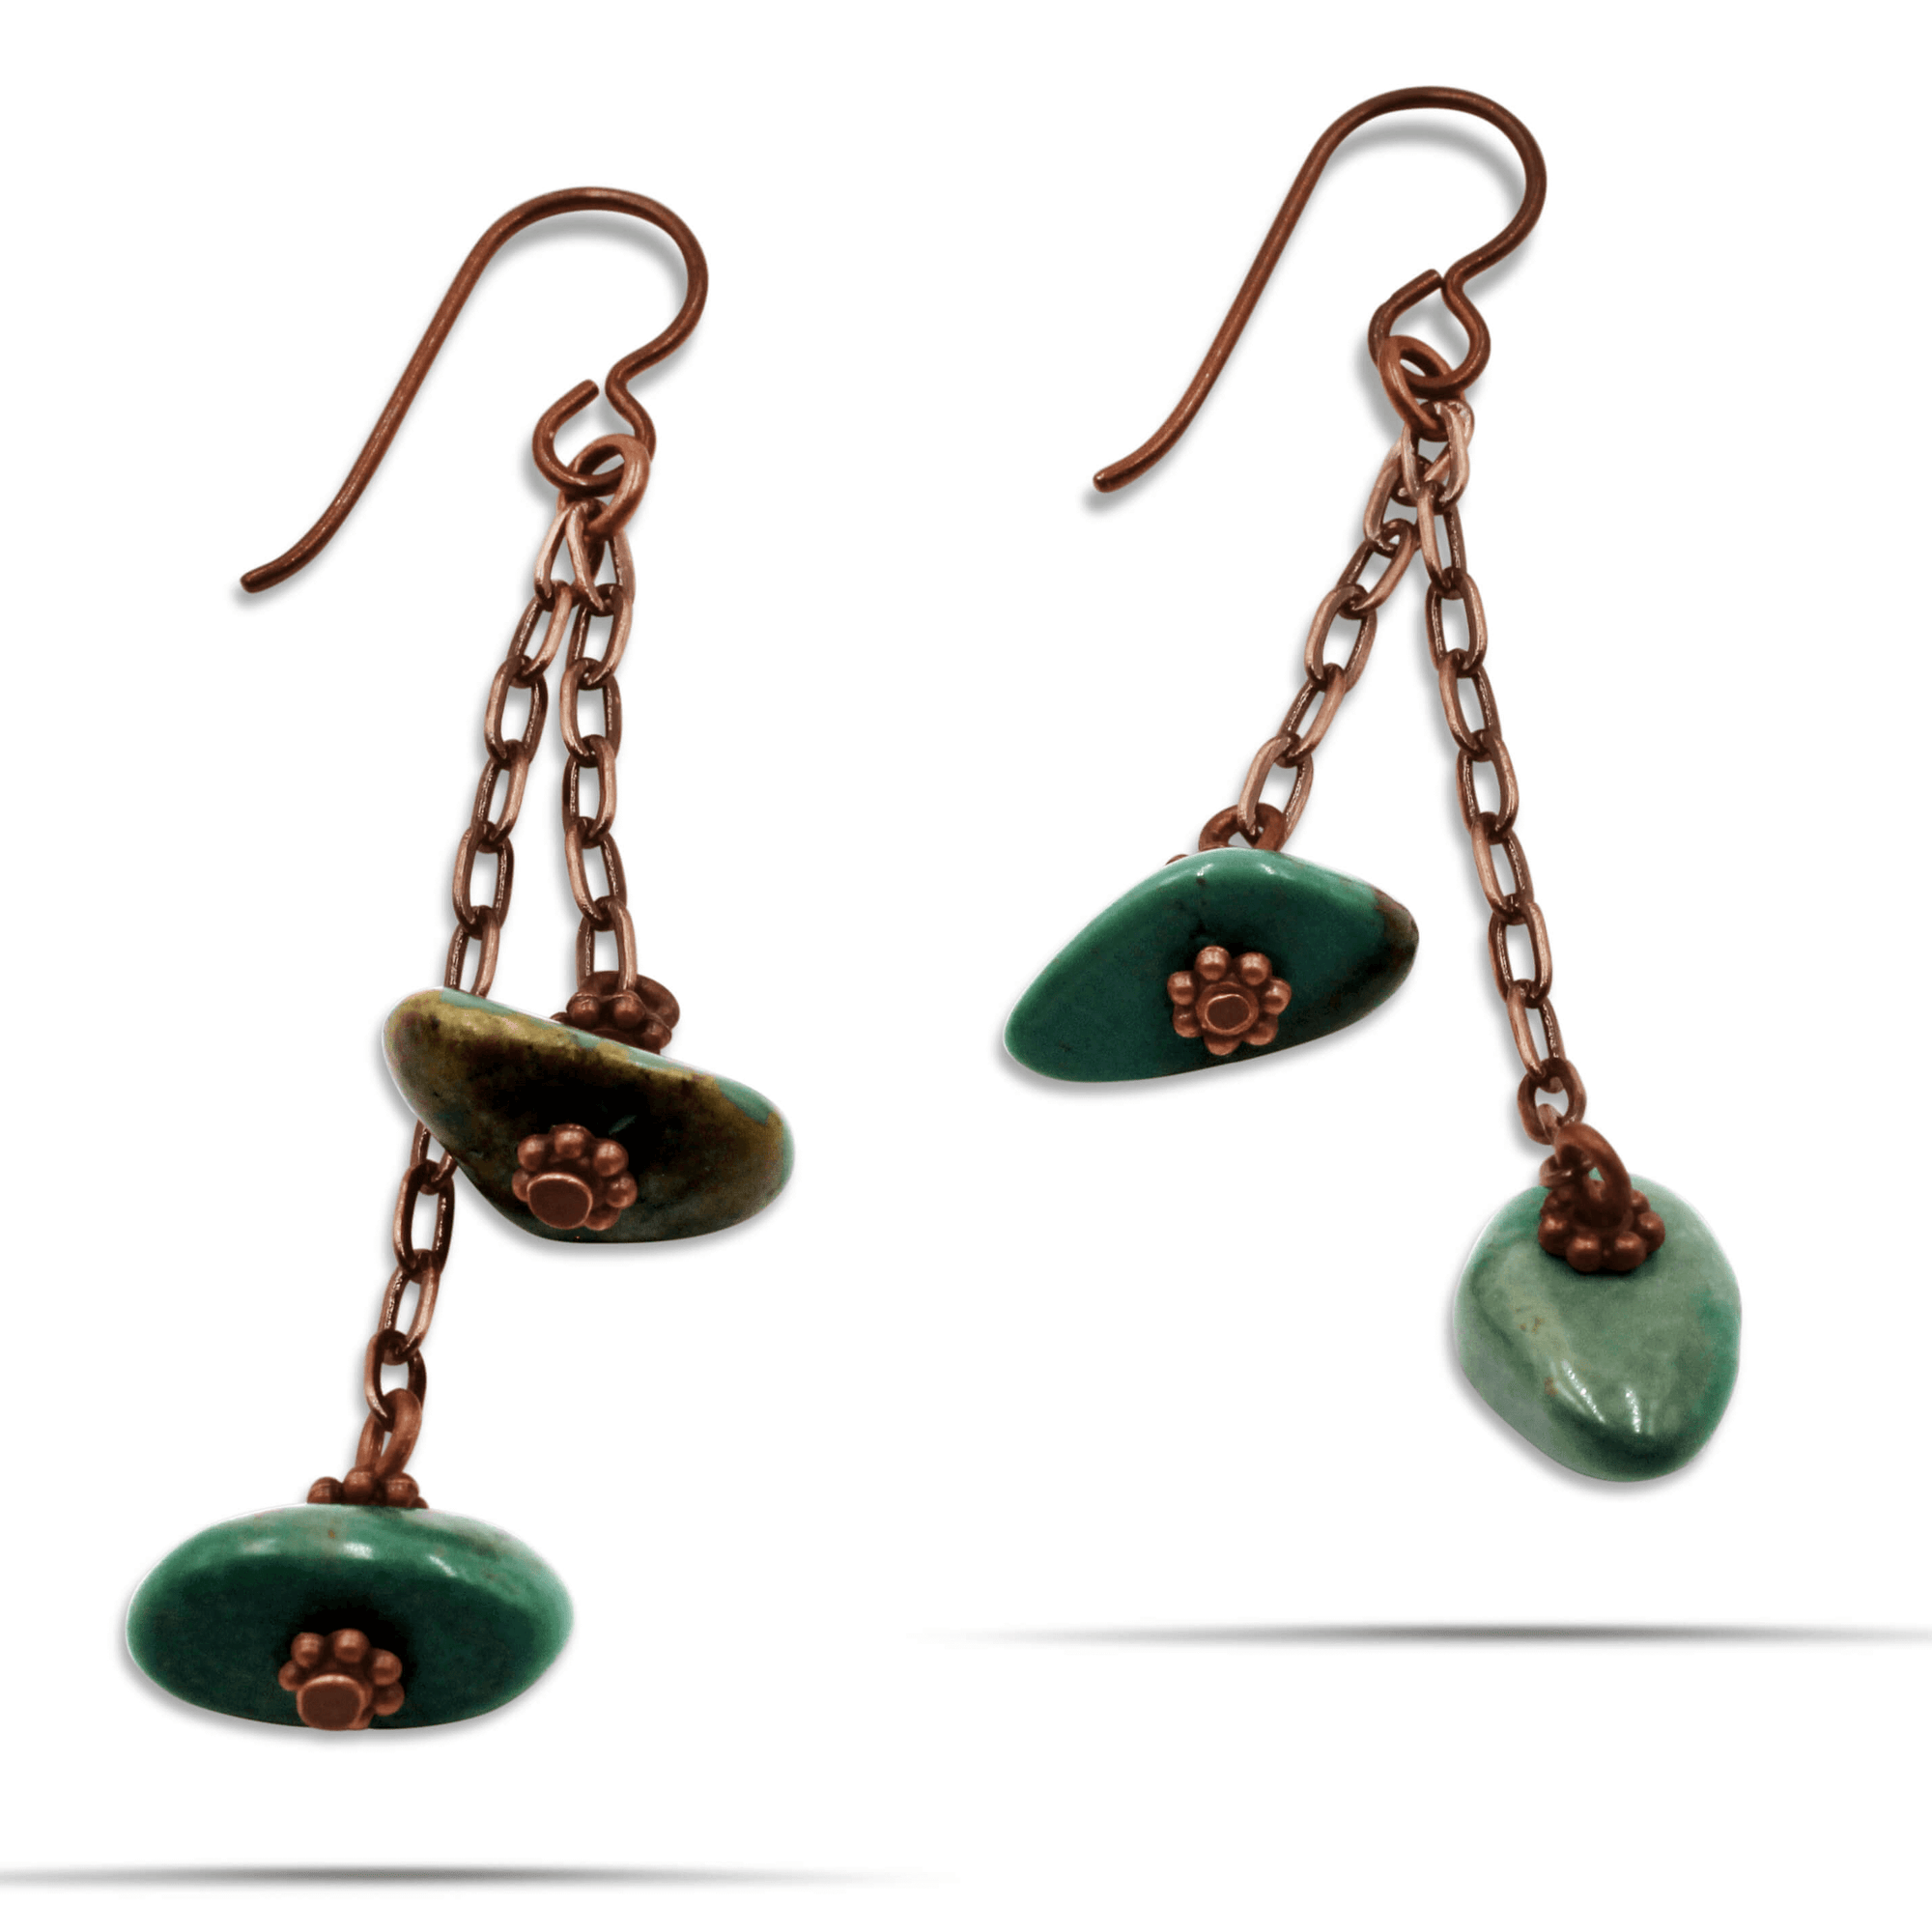 Alydia Turquoise Copper Chain Earrings with Niobium Ear Wires for Sensitive Ears-Earrings- Creative Jewelry by Marcia